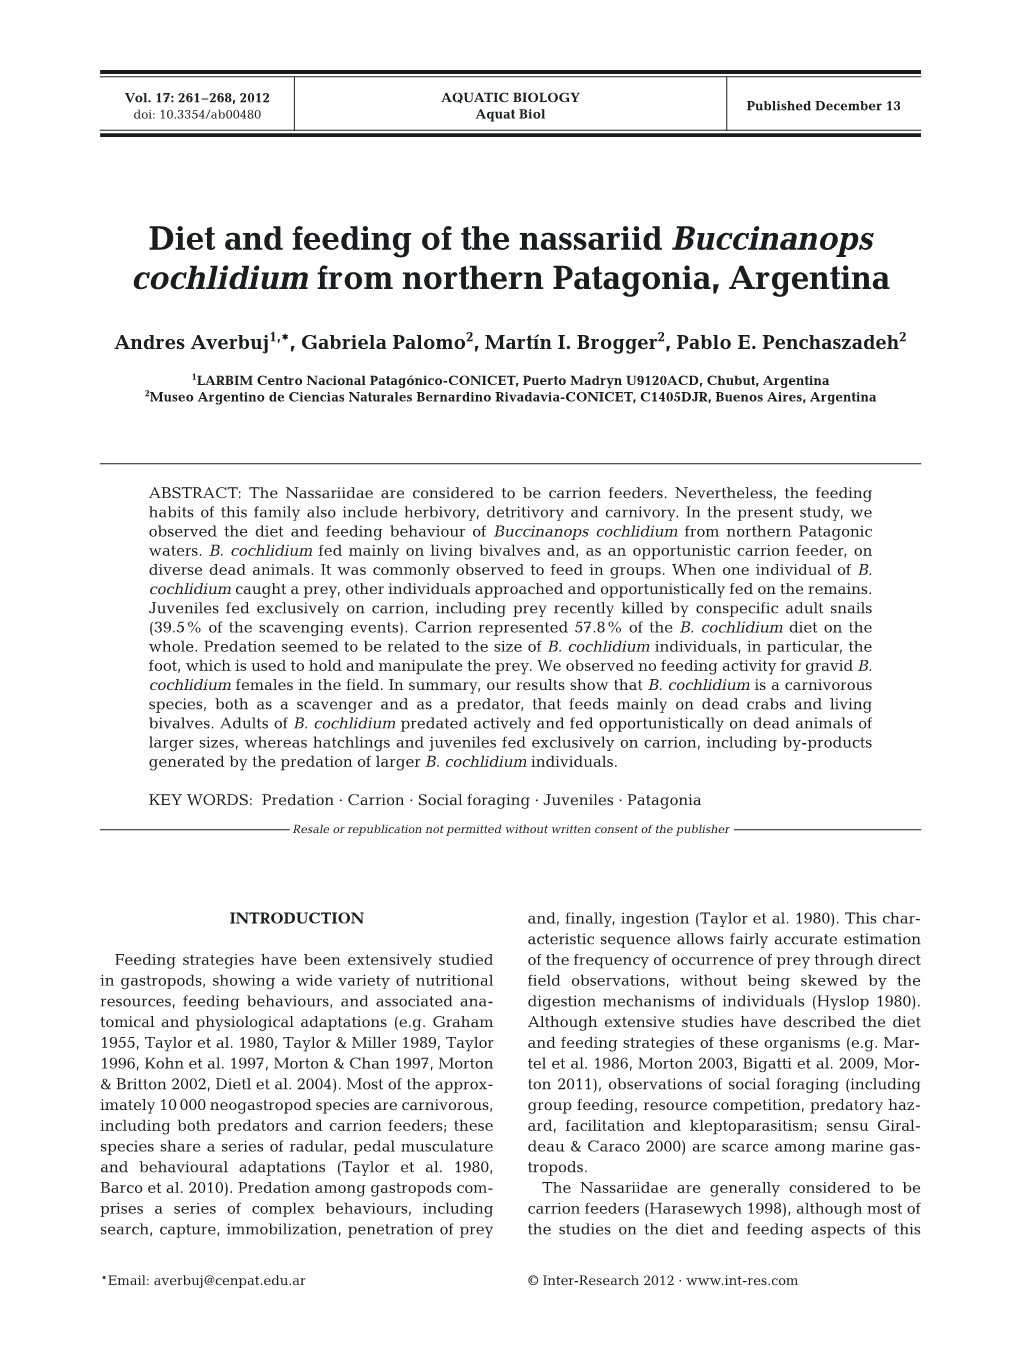 Diet and Feeding of the Nassariid Buccinanops Cochlidium from Northern Patagonia, Argentina